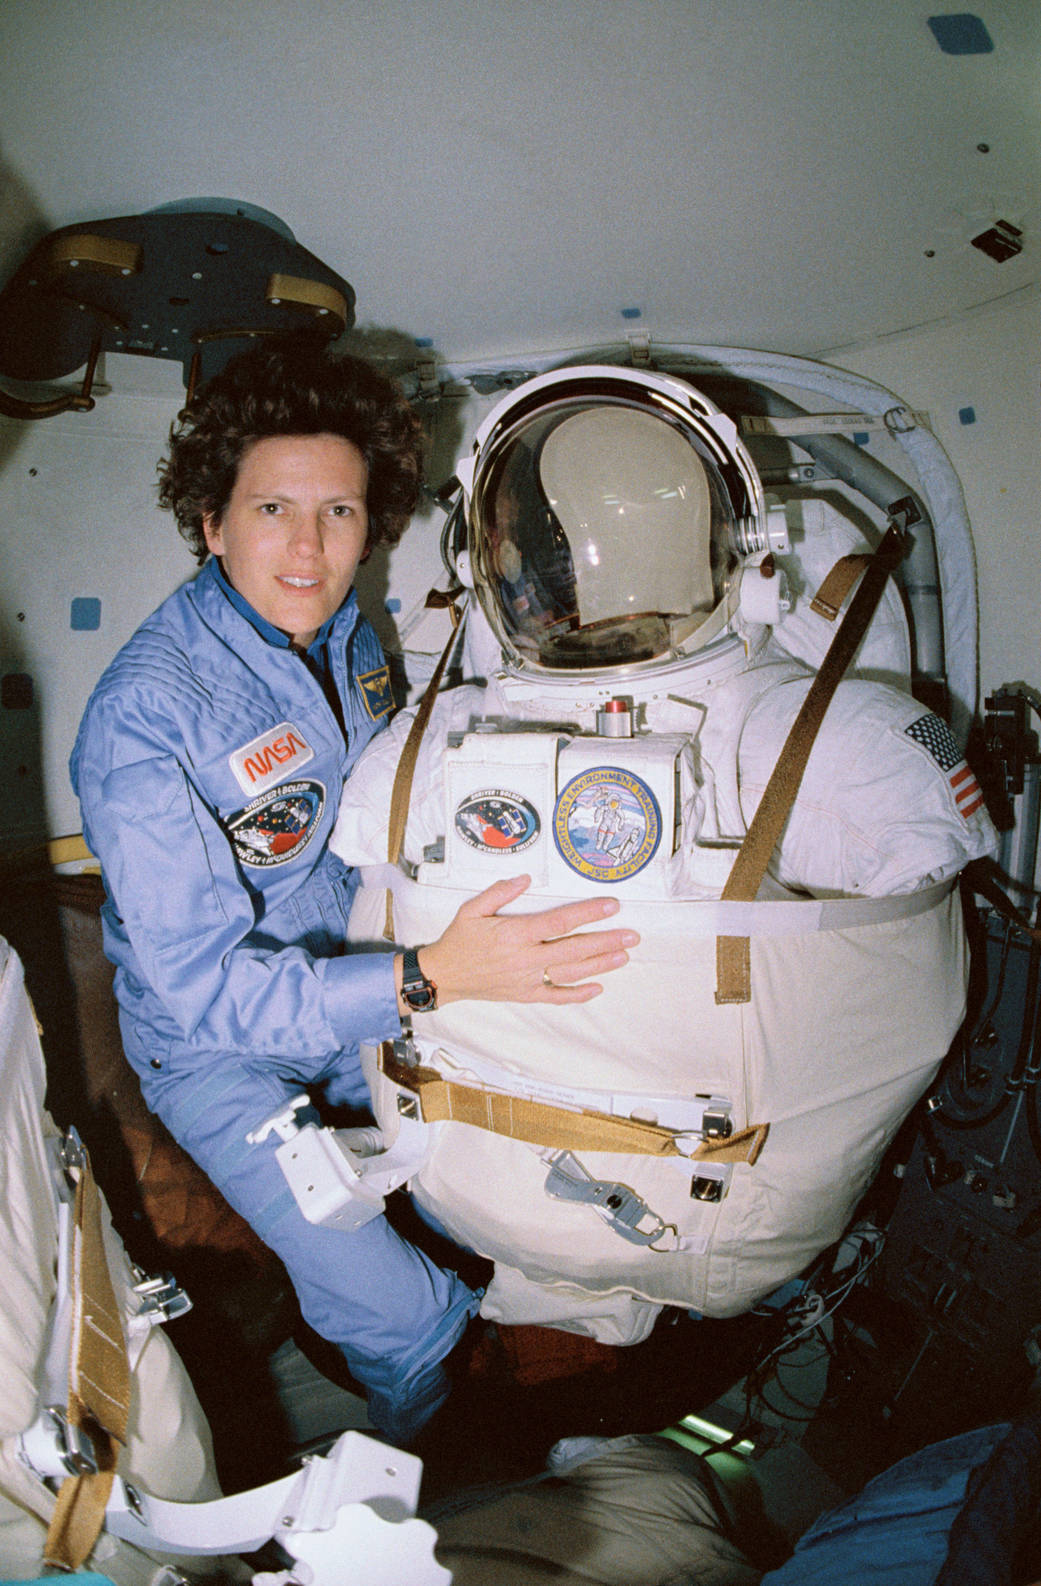 An astronaut next to her spacesuit in the crew cabin of the shuttle.